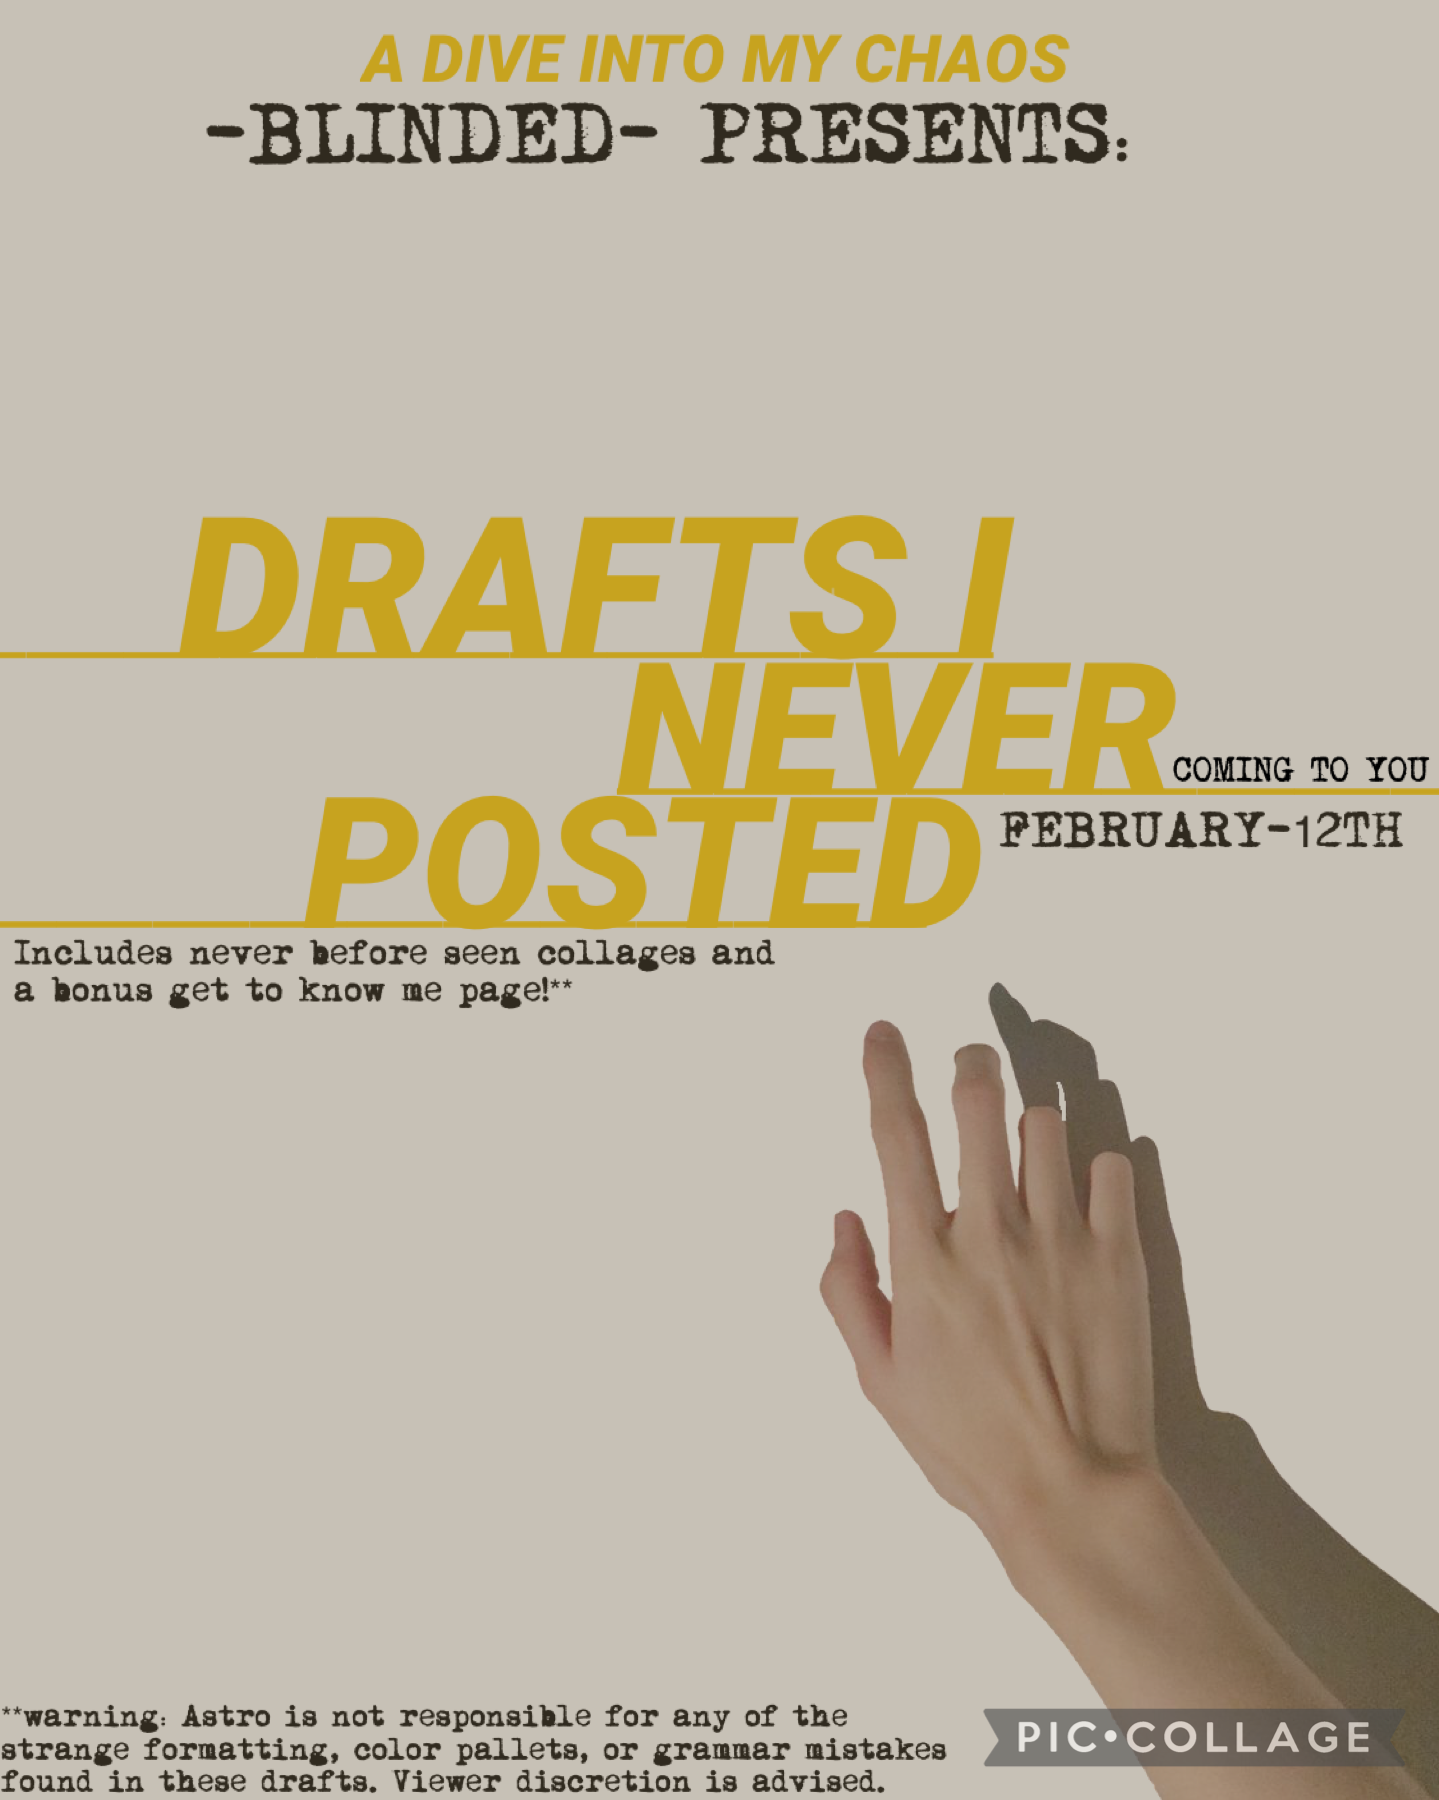 💥DRAFTS I NEVER POSTED💥
Coming to screens near you beginning February 12th

Did I make a promotional poster for my own drafts dump? Yes. Yes I did. 

Because I’m fabulous, and I deserve it 😎